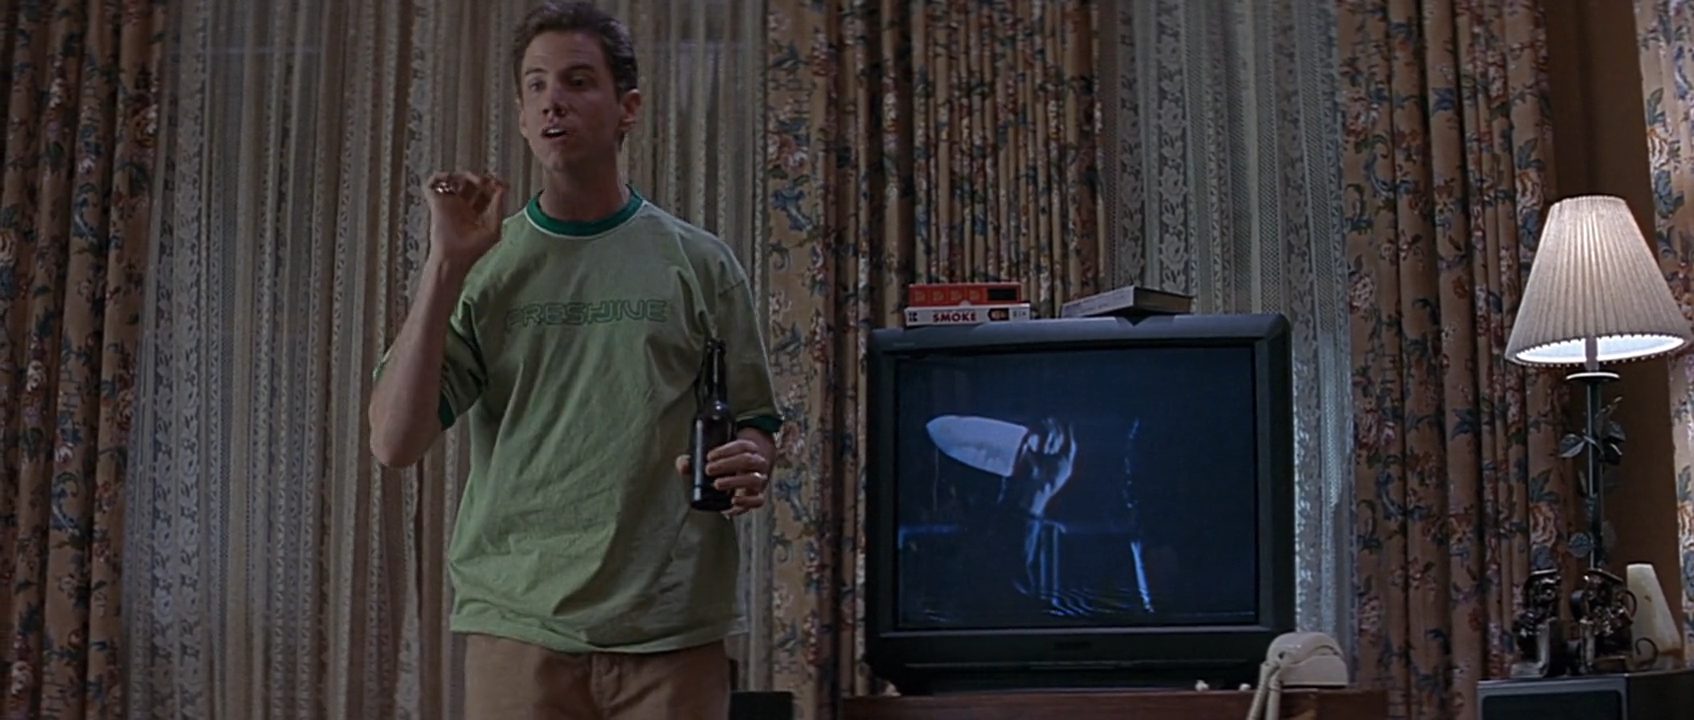 Randy stands in front of the television, which is playing the movie Halloween, as he explains the rules of horror movies